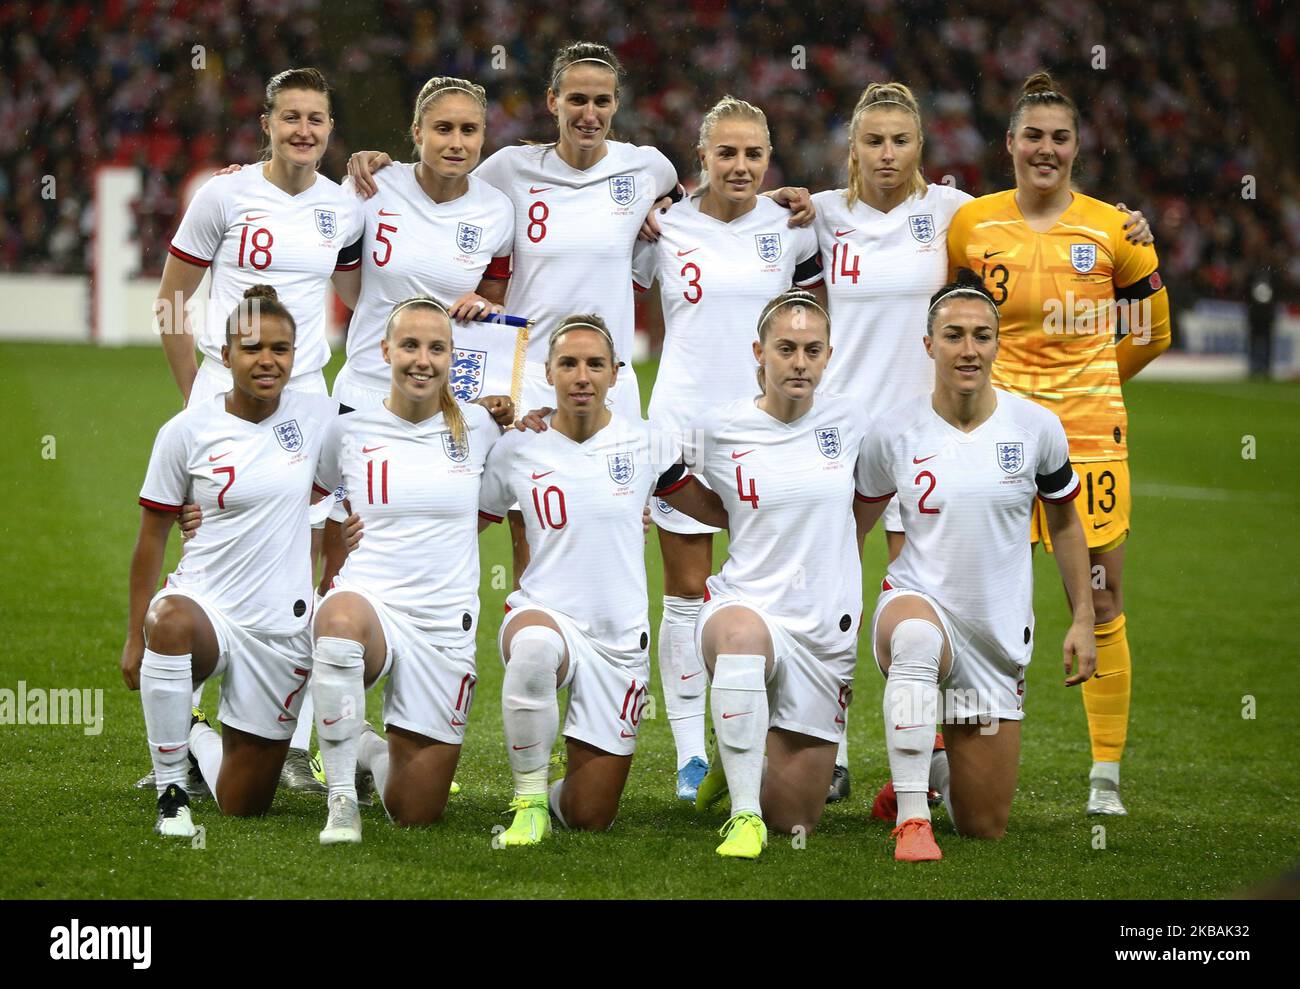 England Women Team Back Row:- L-R Ellen White, Steph Houghton, Jill Scott, Alex Greenwood,Leah Williamson and Mary Earps of England Women. Front Row:- L-R Nikita Parris, Beth Mead, Jordan Nobbs, Keira Walsh and Lucy Bronze of England Women during Women's International Friendly between England Women and Germany Women at Wembley stadium in London, England on November 09, 2019 Credit Action Foto Sport (Photo by Action Foto Sport/NurPhoto) Stock Photo